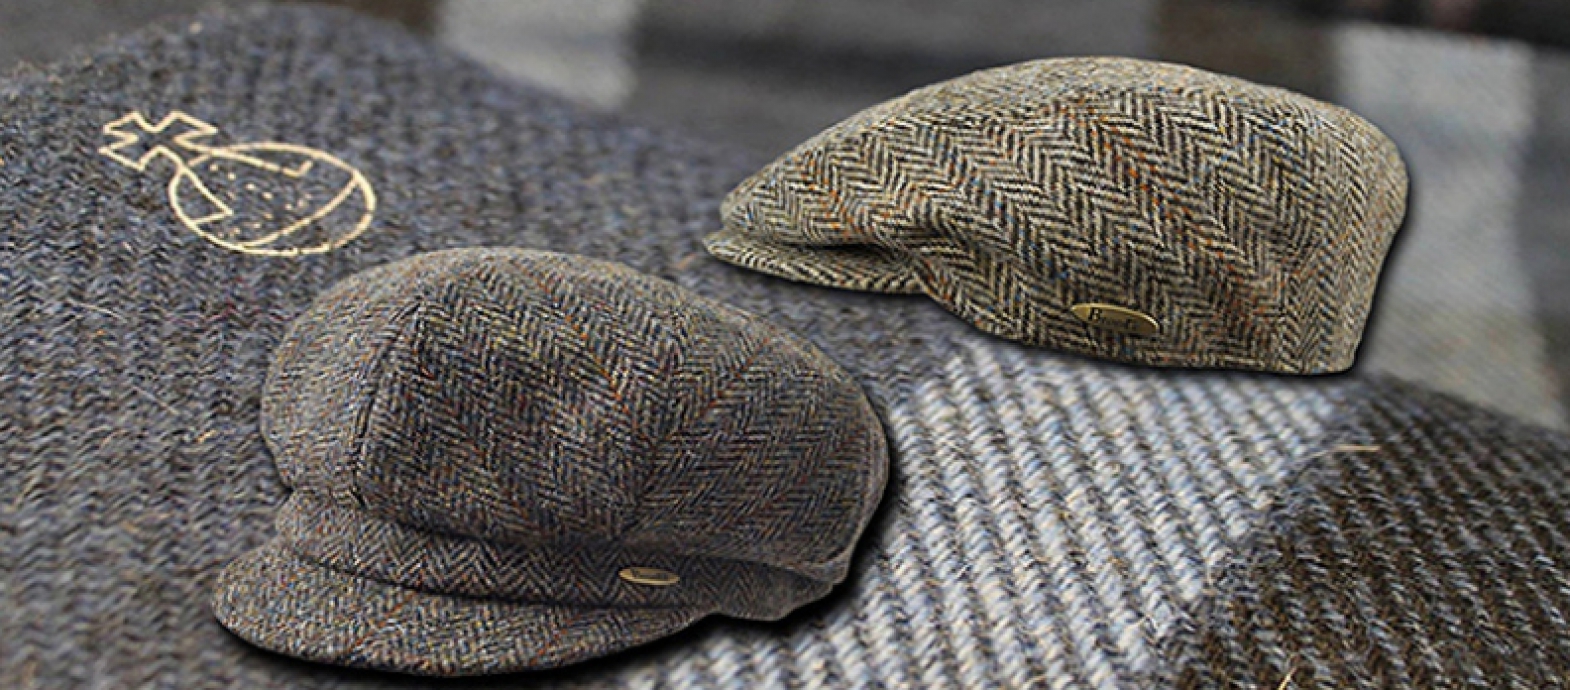 Harris Tweed caps for men and women by Bronté